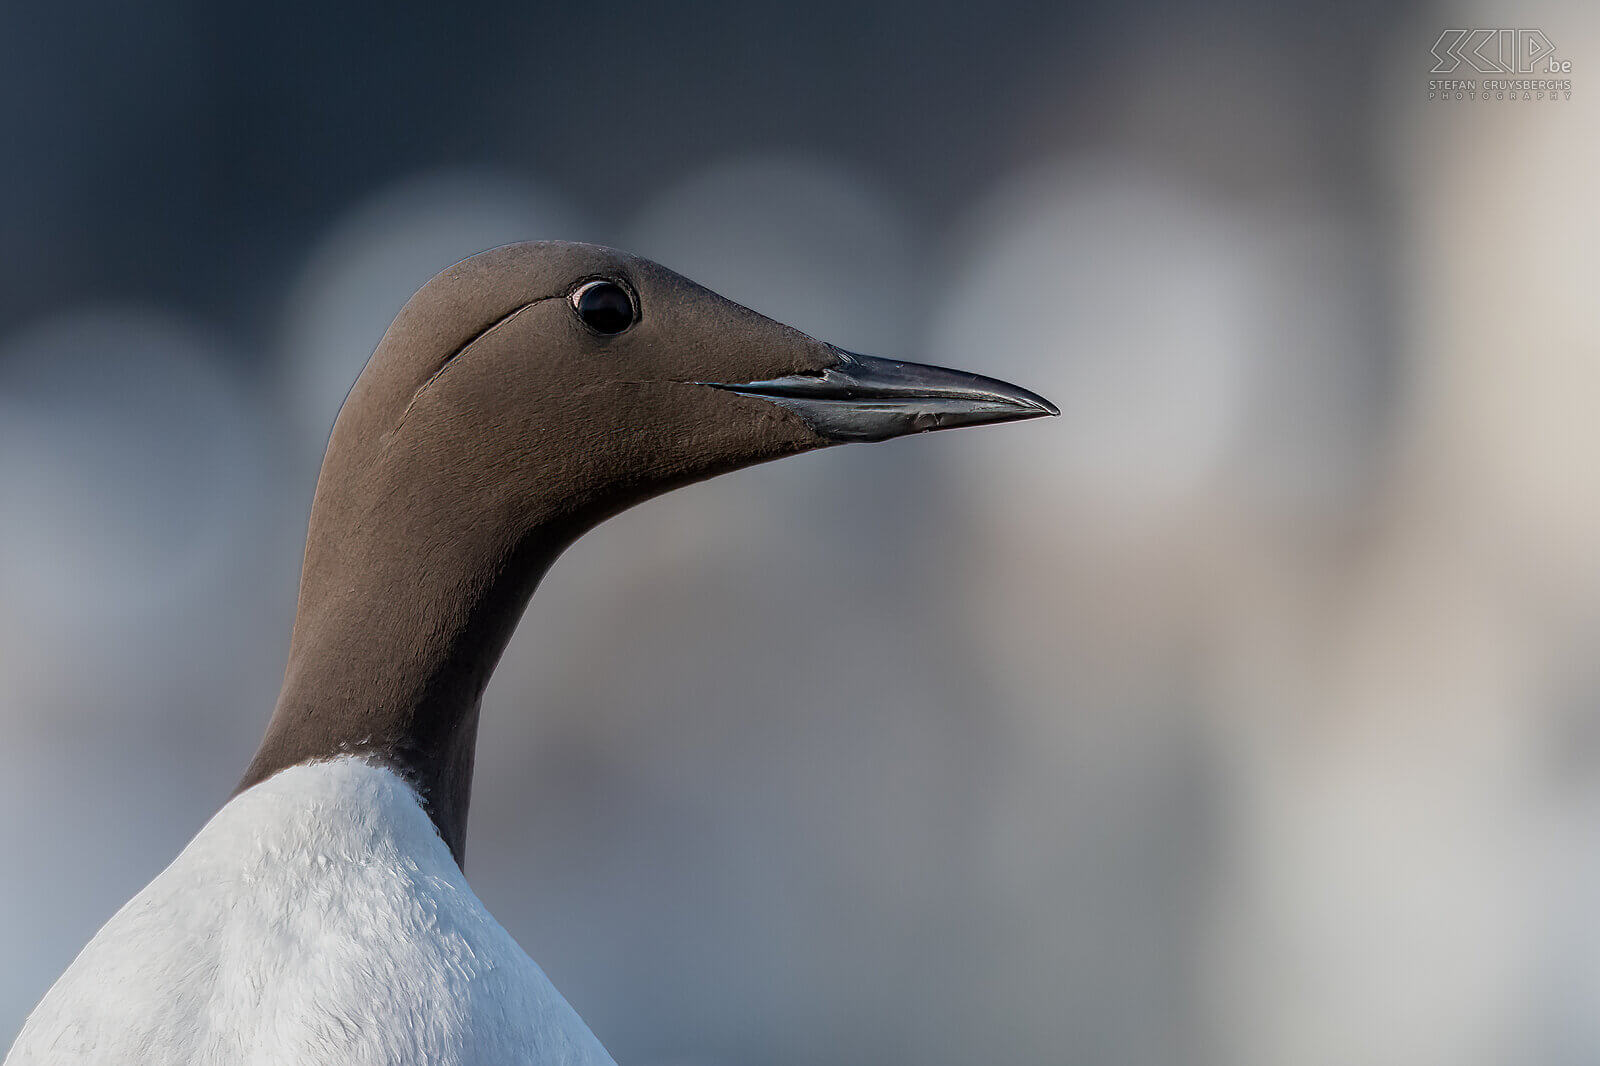 Farne Islands - Guillemot The Farne Islands are home to more than 25 nesting bird species. One of them is the guillemot. It is estimated that over 100,000 individual guillemots inhabit the island, so you can't miss them during a boat trip. Stefan Cruysberghs